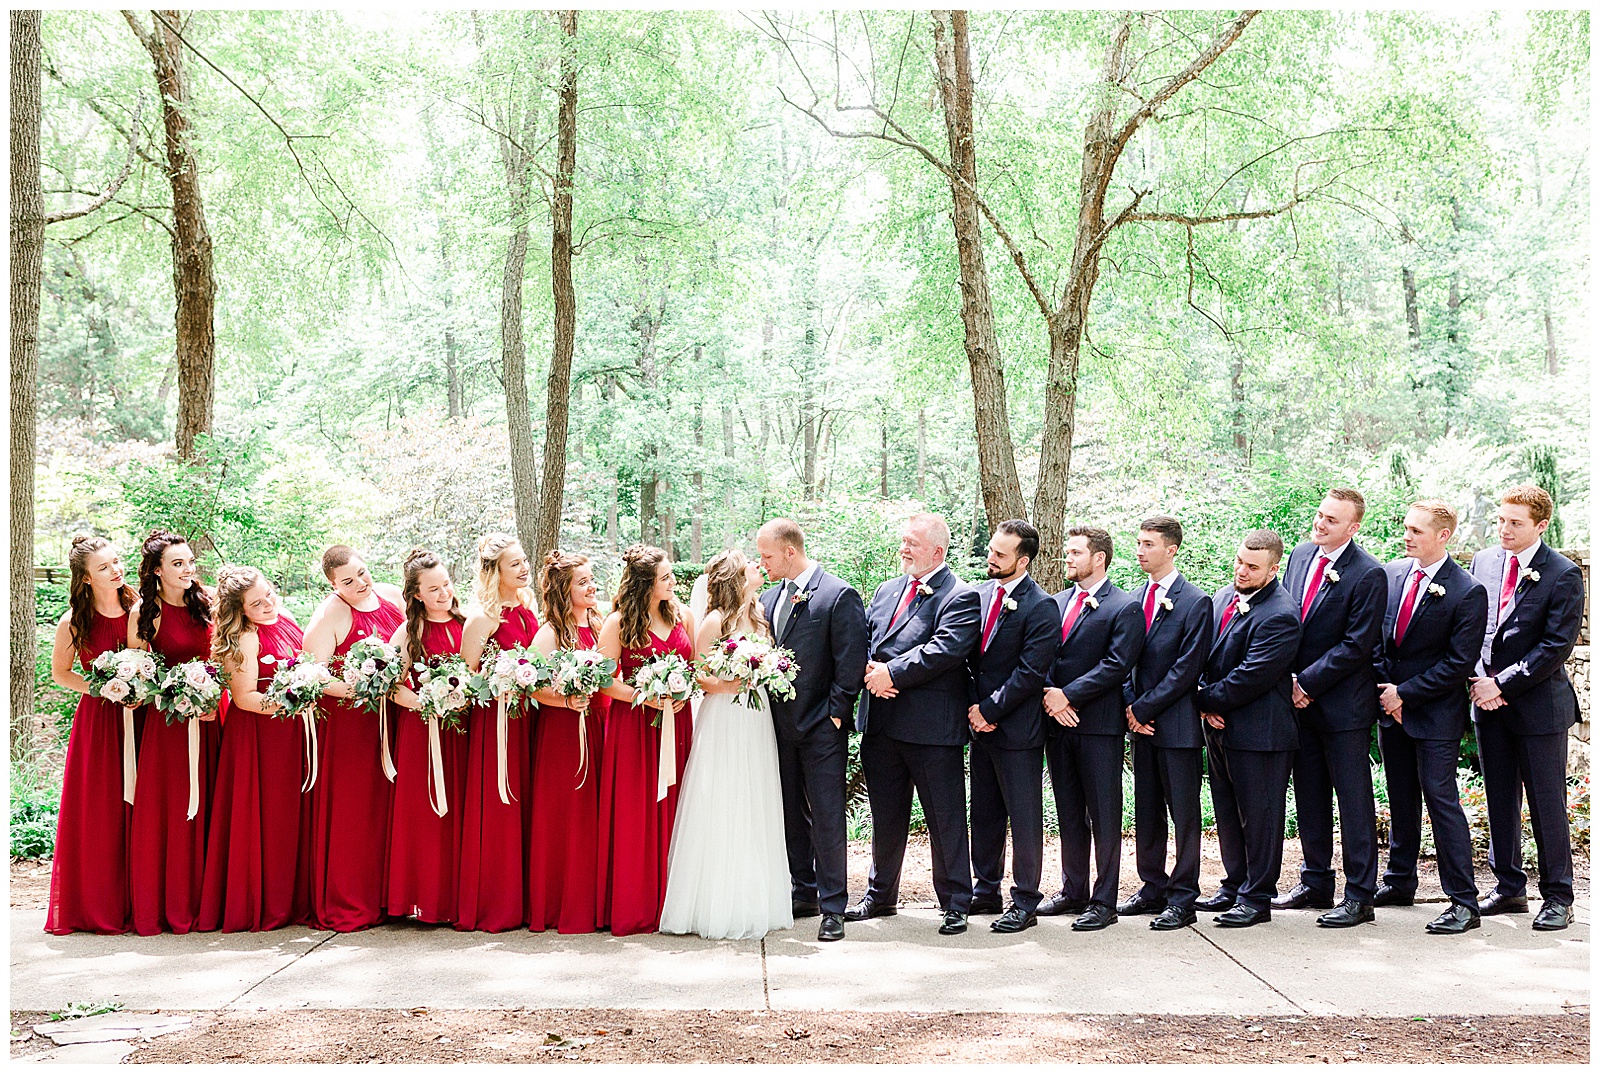 Stunning Bridal Party Photo from Elegant Modern Red and Navy Blue Themed Wedding in Charlotte, NC | check out the full wedding at KevynDixonPhoto.com